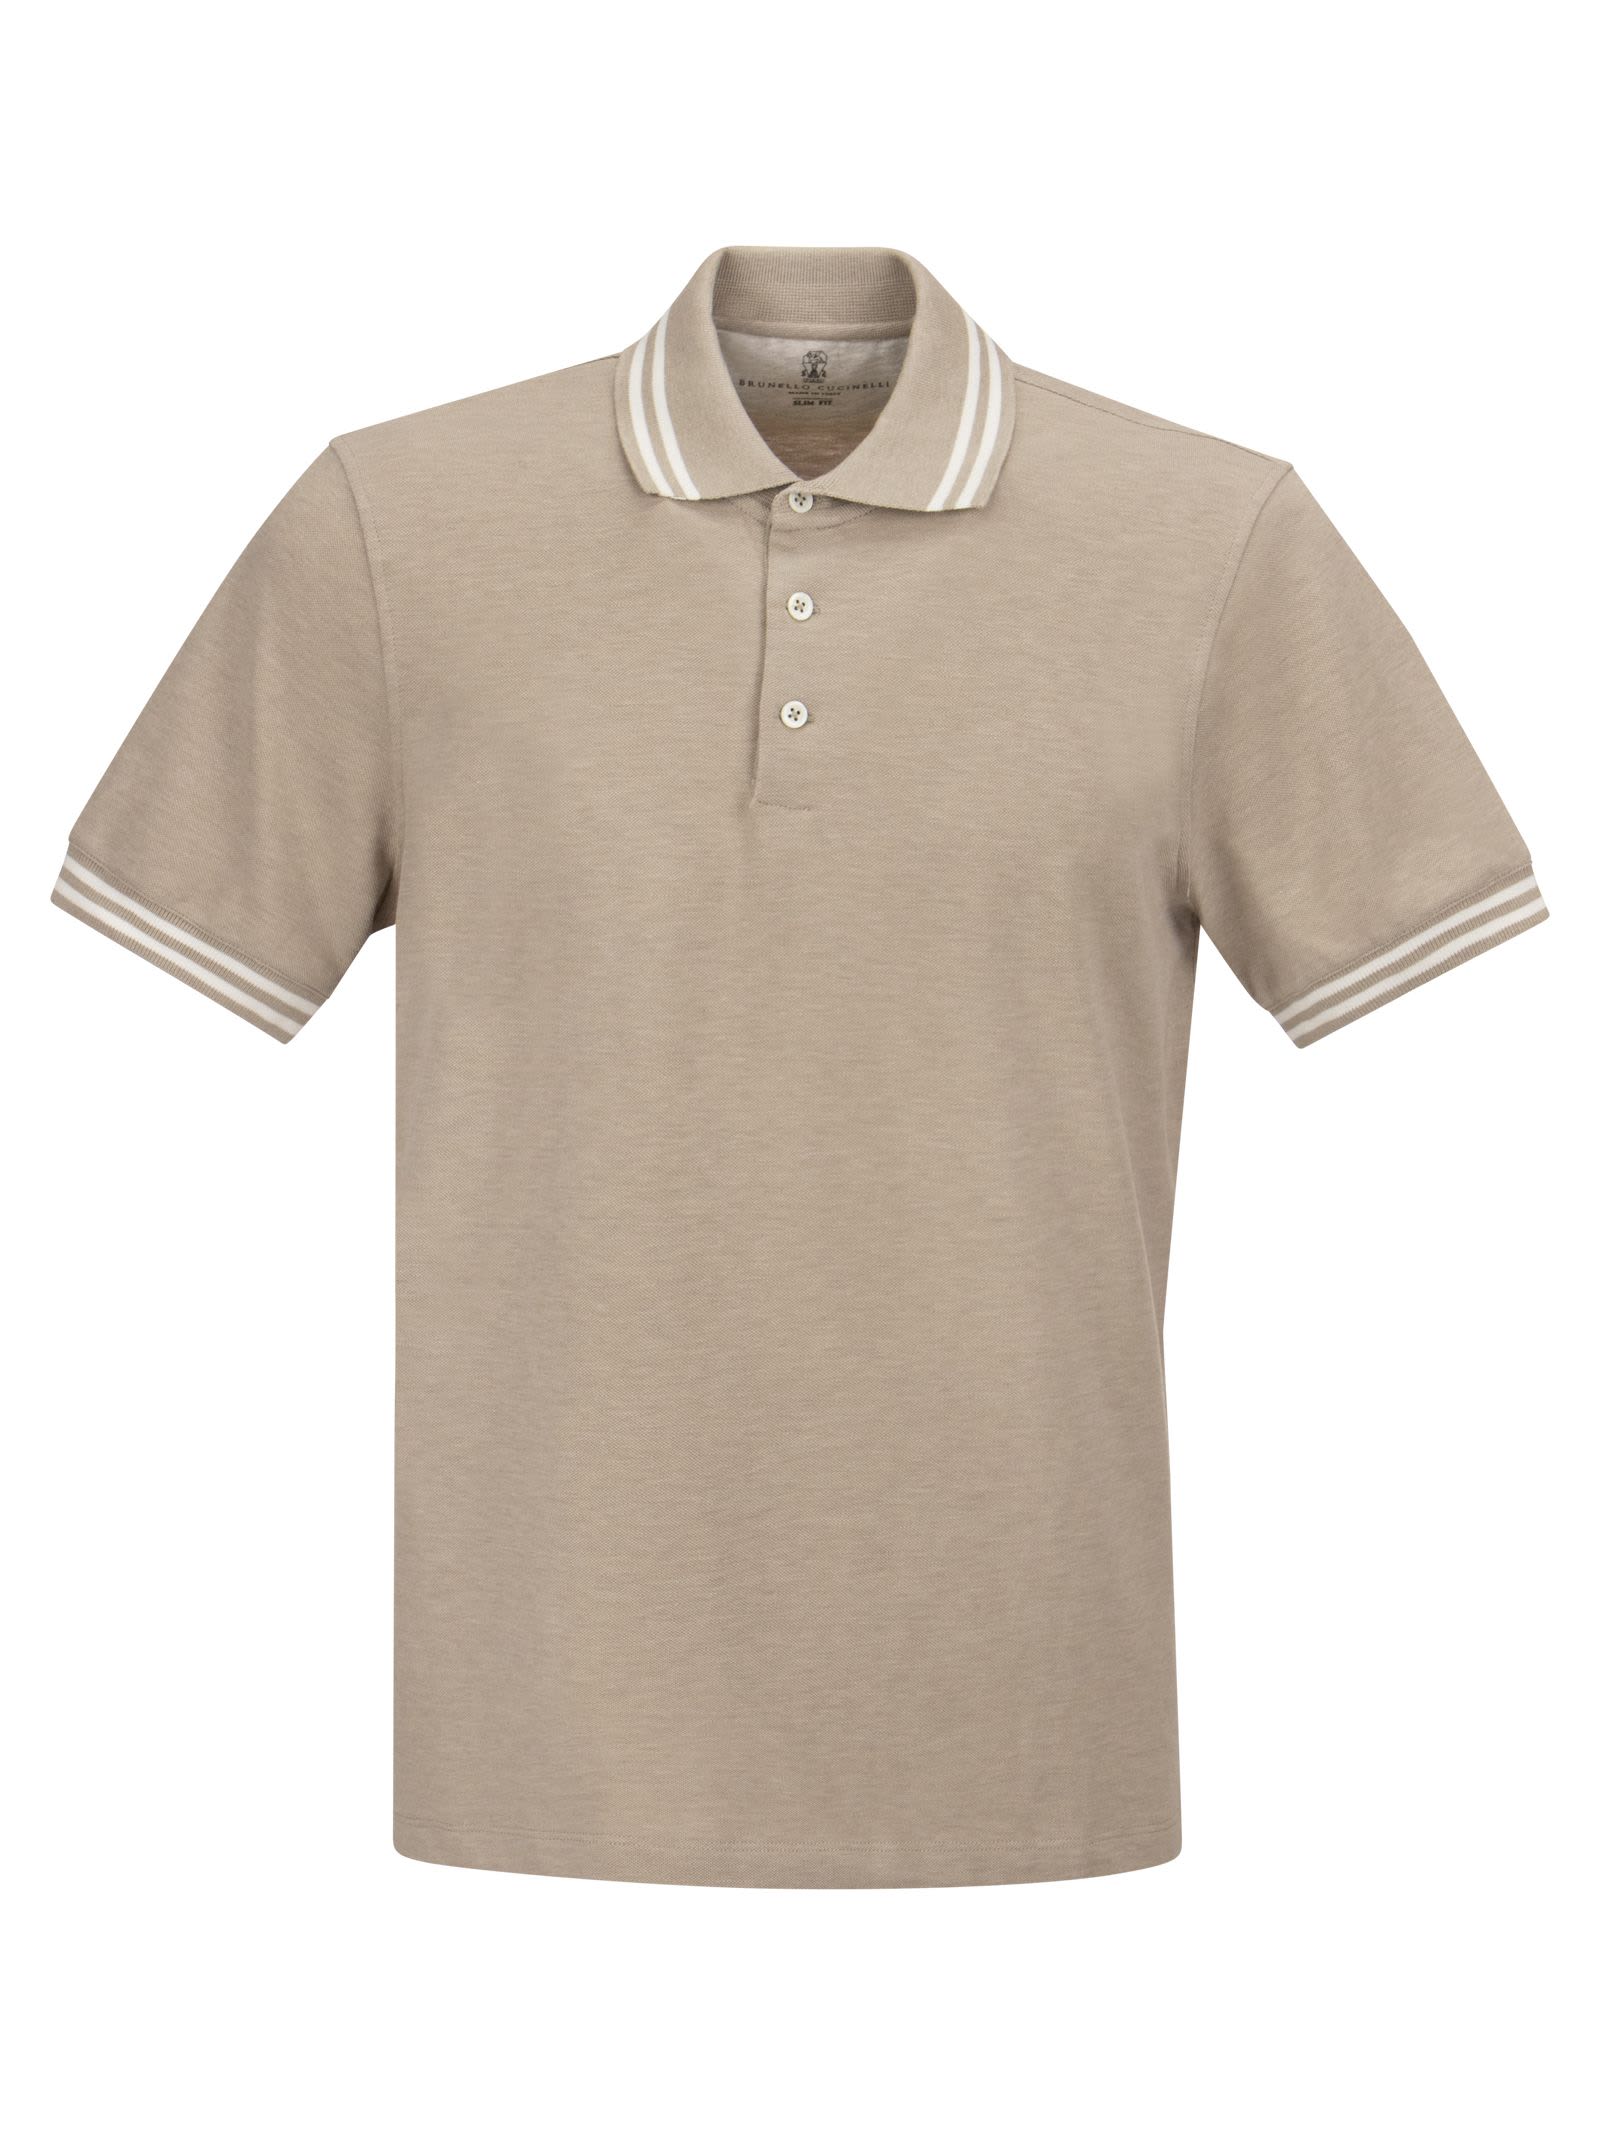 Brunello Cucinelli Slim Fit Cotton Pique Polo Shirt With Striped Knit Detailing